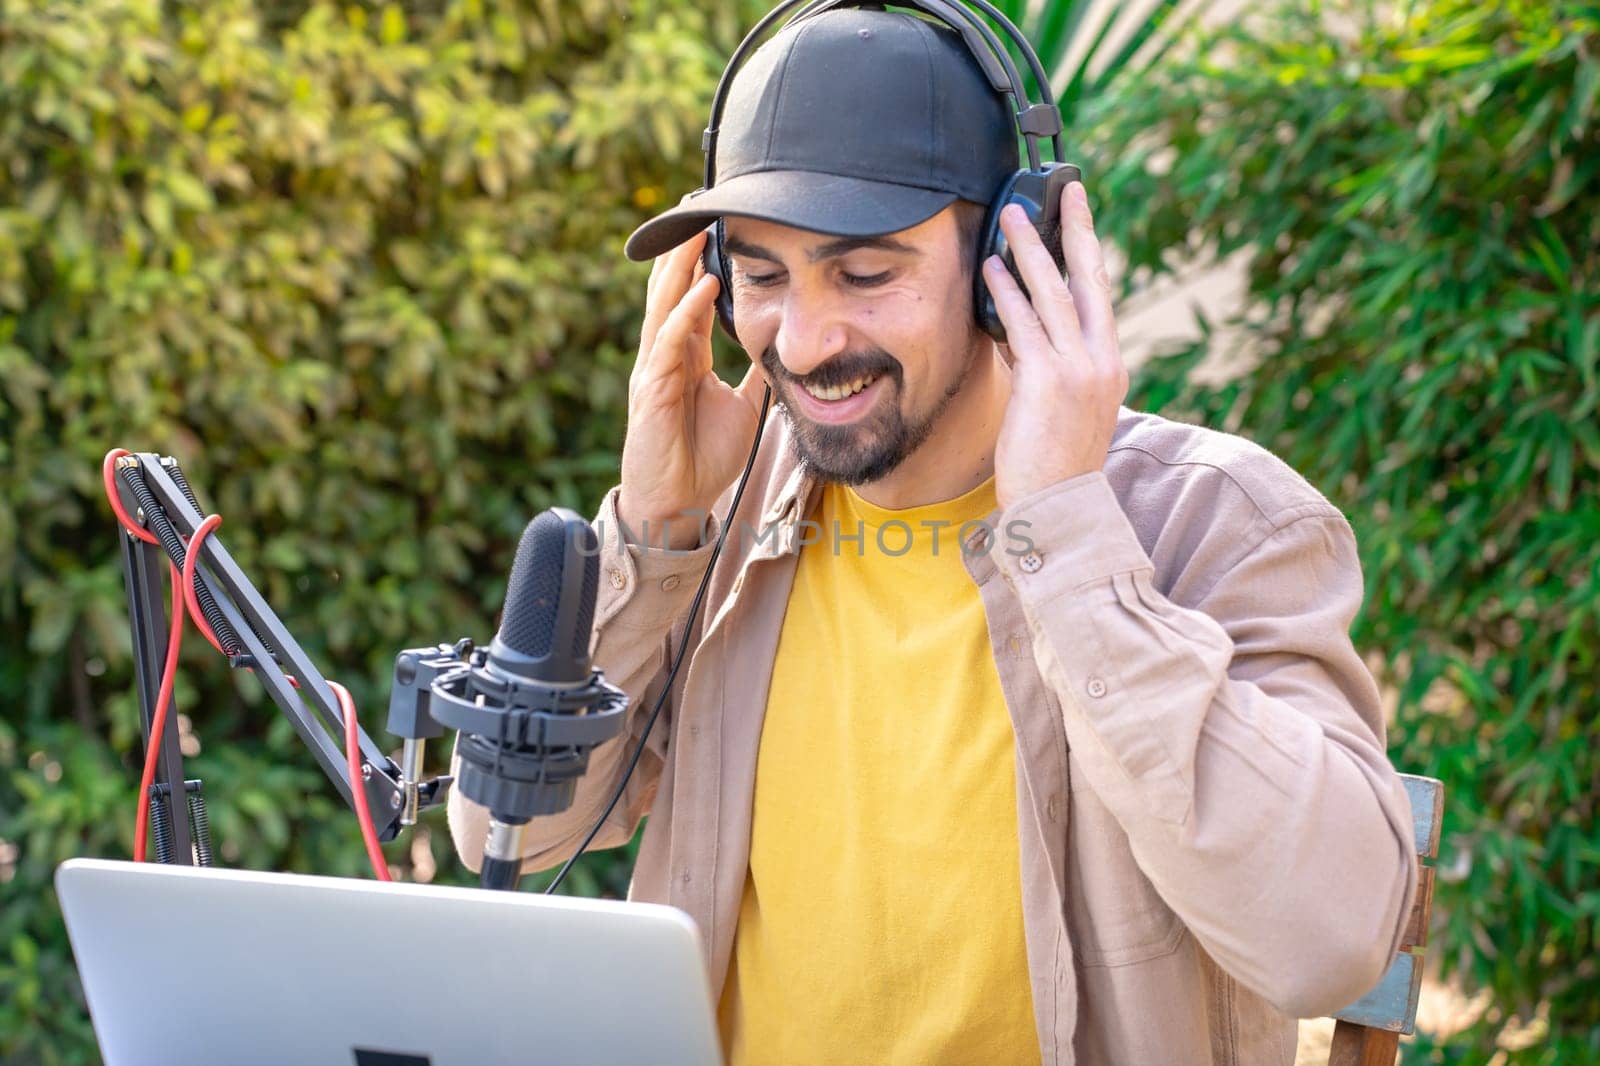 A man with a beard and moustache wearing a cap and headphones is singing and recording podcast into a microphone while using a laptop outdoor. He looks happy and relaxed, enjoying a leisurely musical event